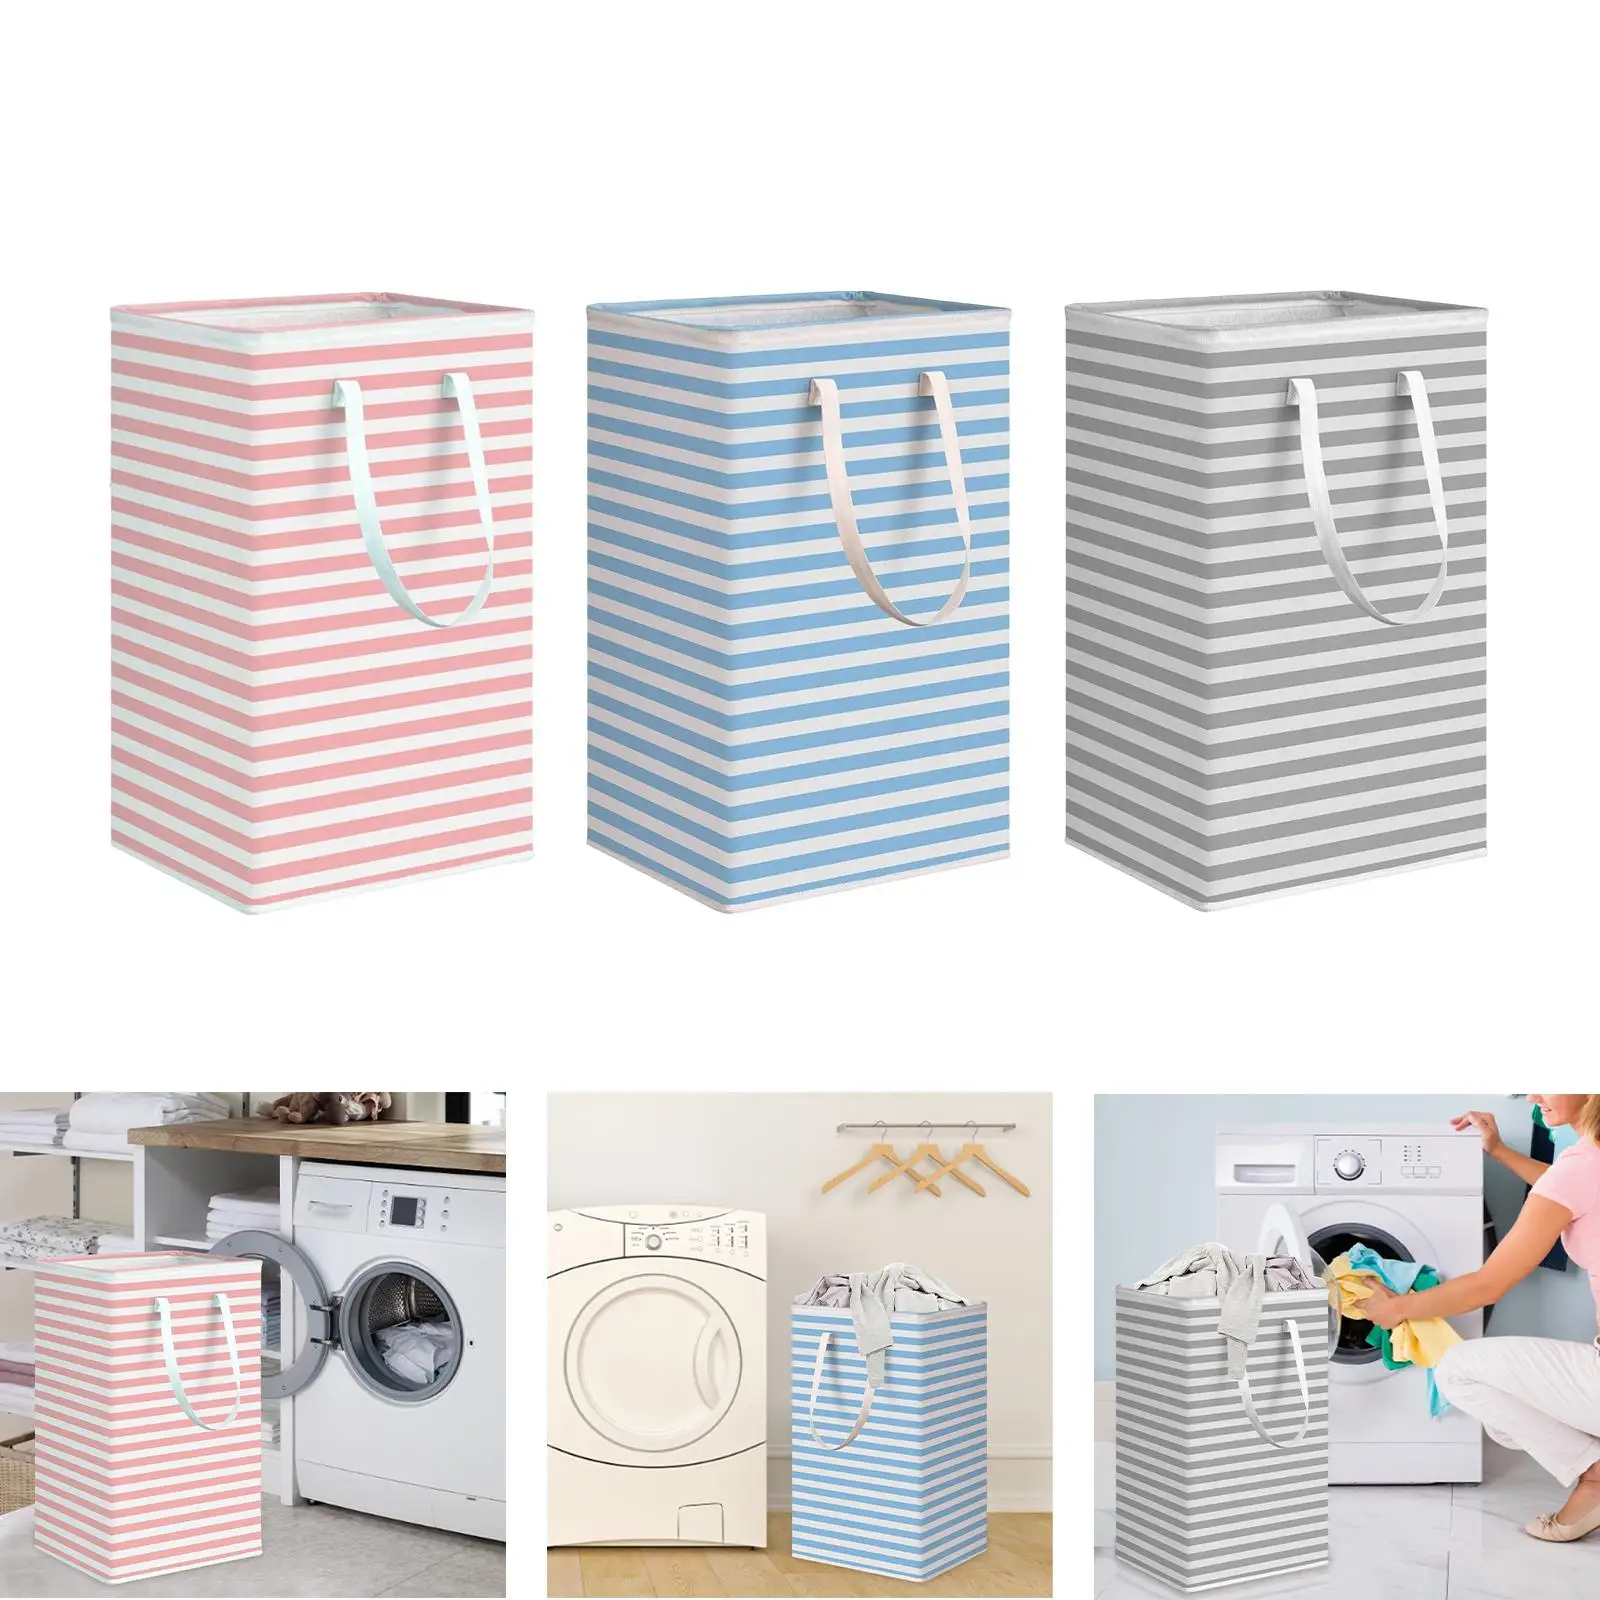 Waterproof 75L Collapsible Large Laundry Basket Washing Bin Laundry Hamper for